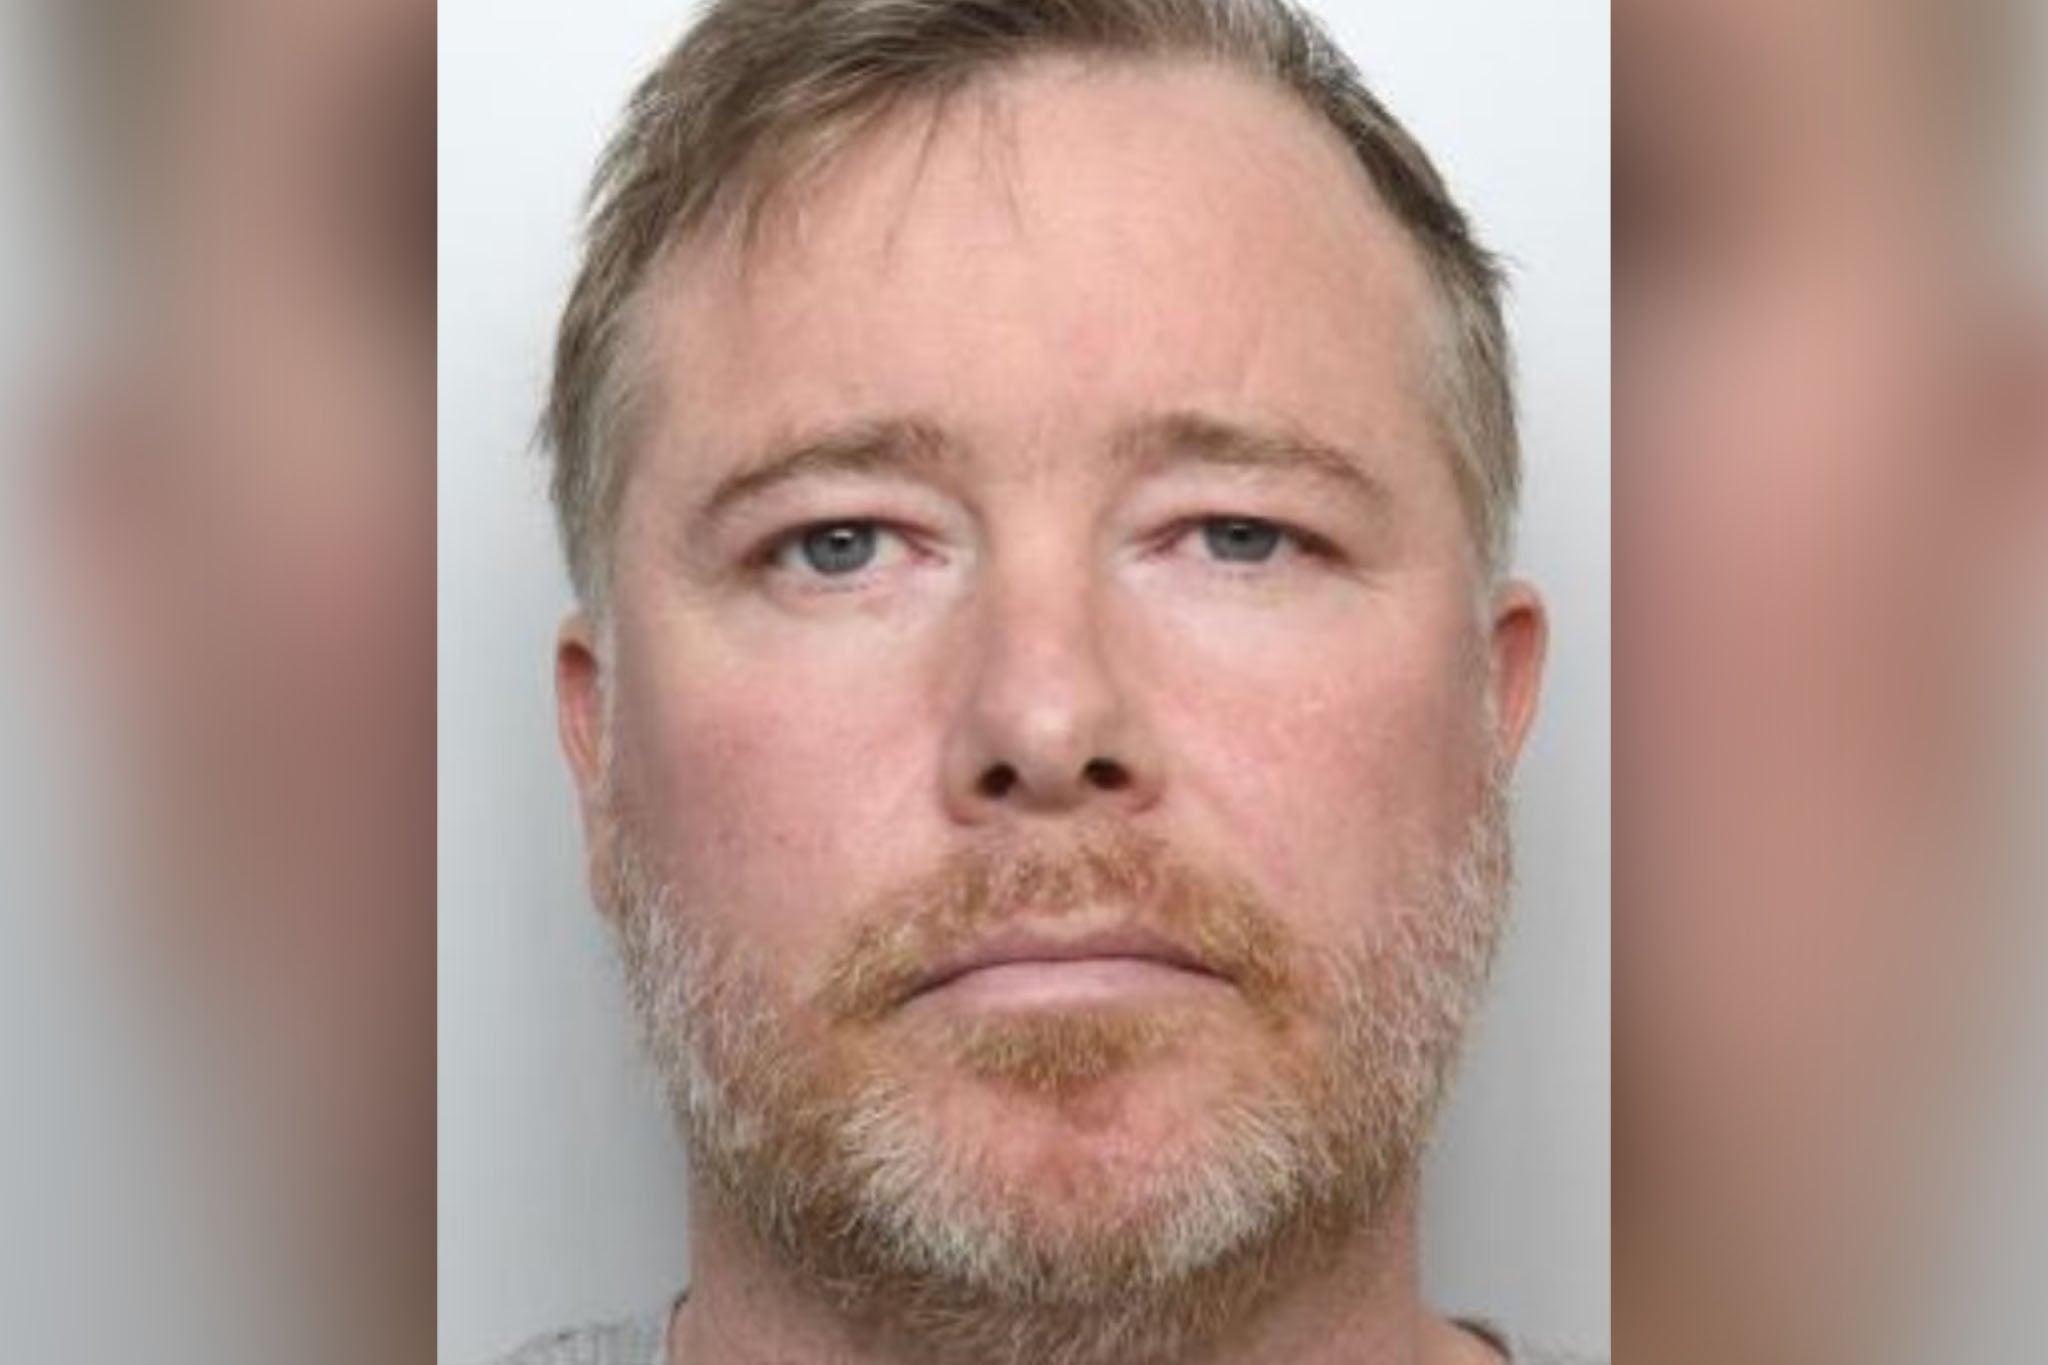 Paul Green was jailed for 16 years for rape, assault and two counts of making a person engage in sexual activity without gaining consent